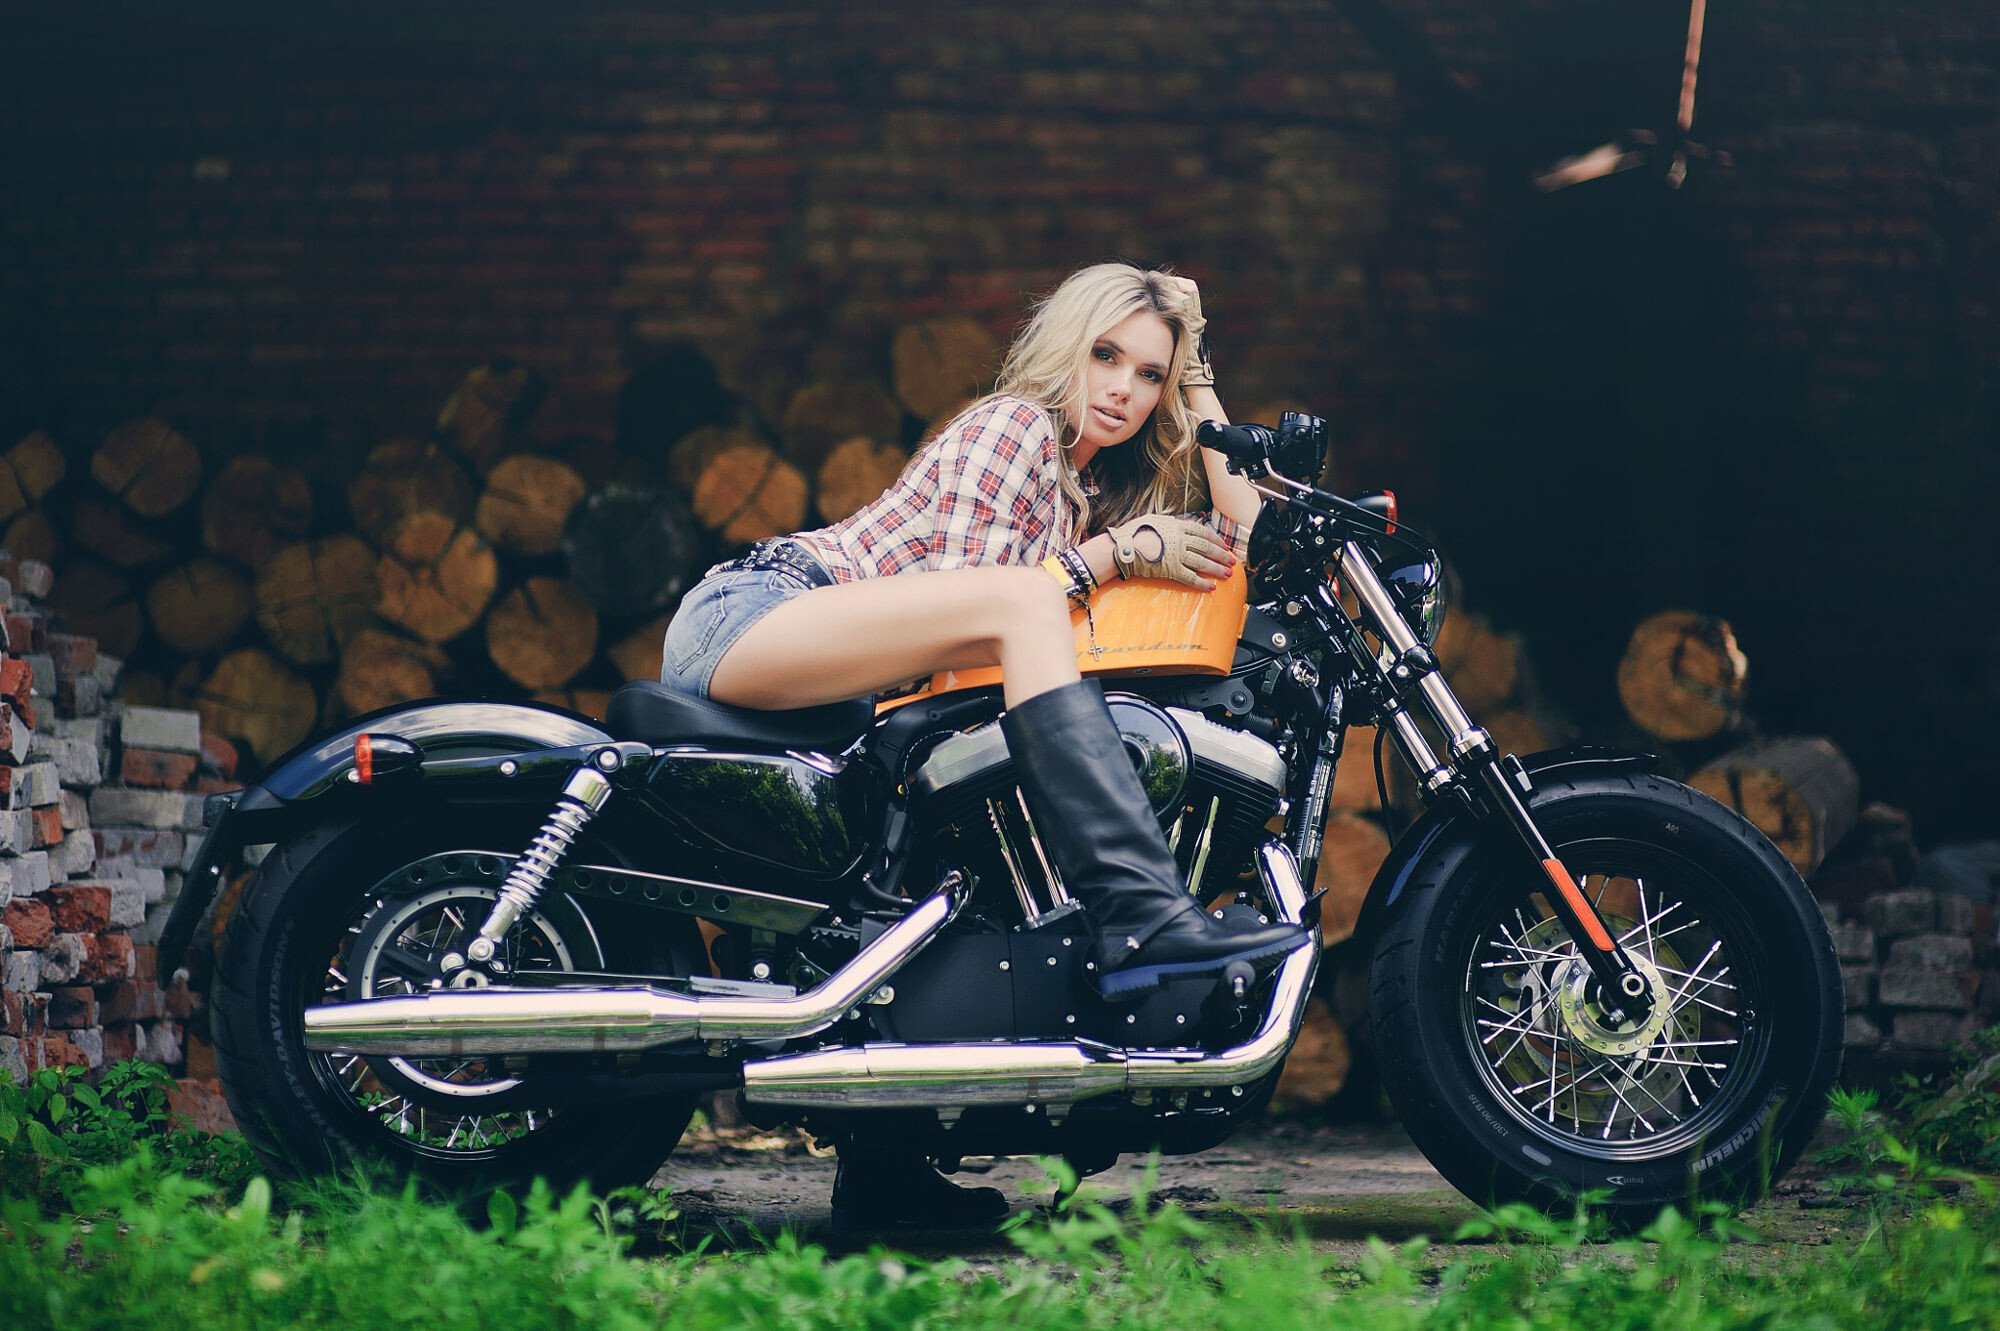 Girls and Motorcycles: Harley-Davidson, Fuel tank, Seat and suspension modifications, A female biker. 2000x1340 HD Wallpaper.